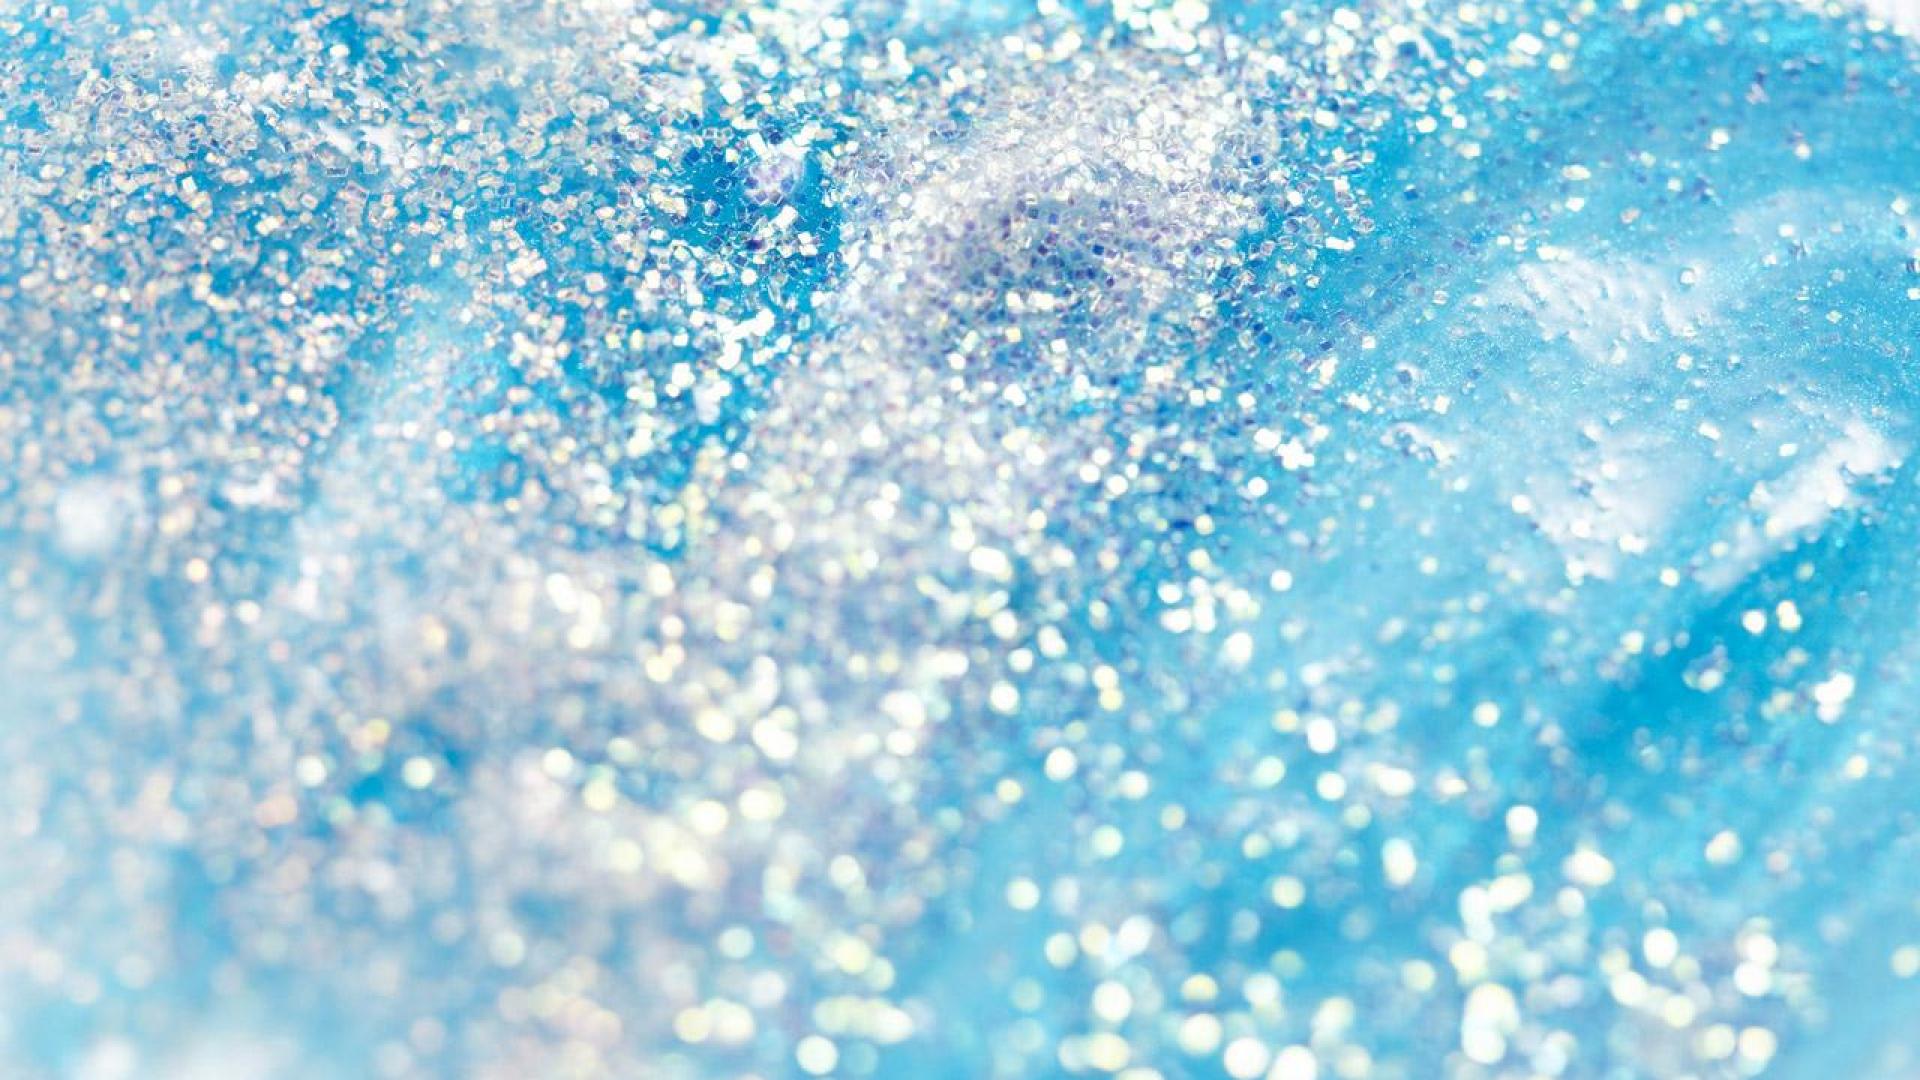 Teal Sparkle Background Image In Collection